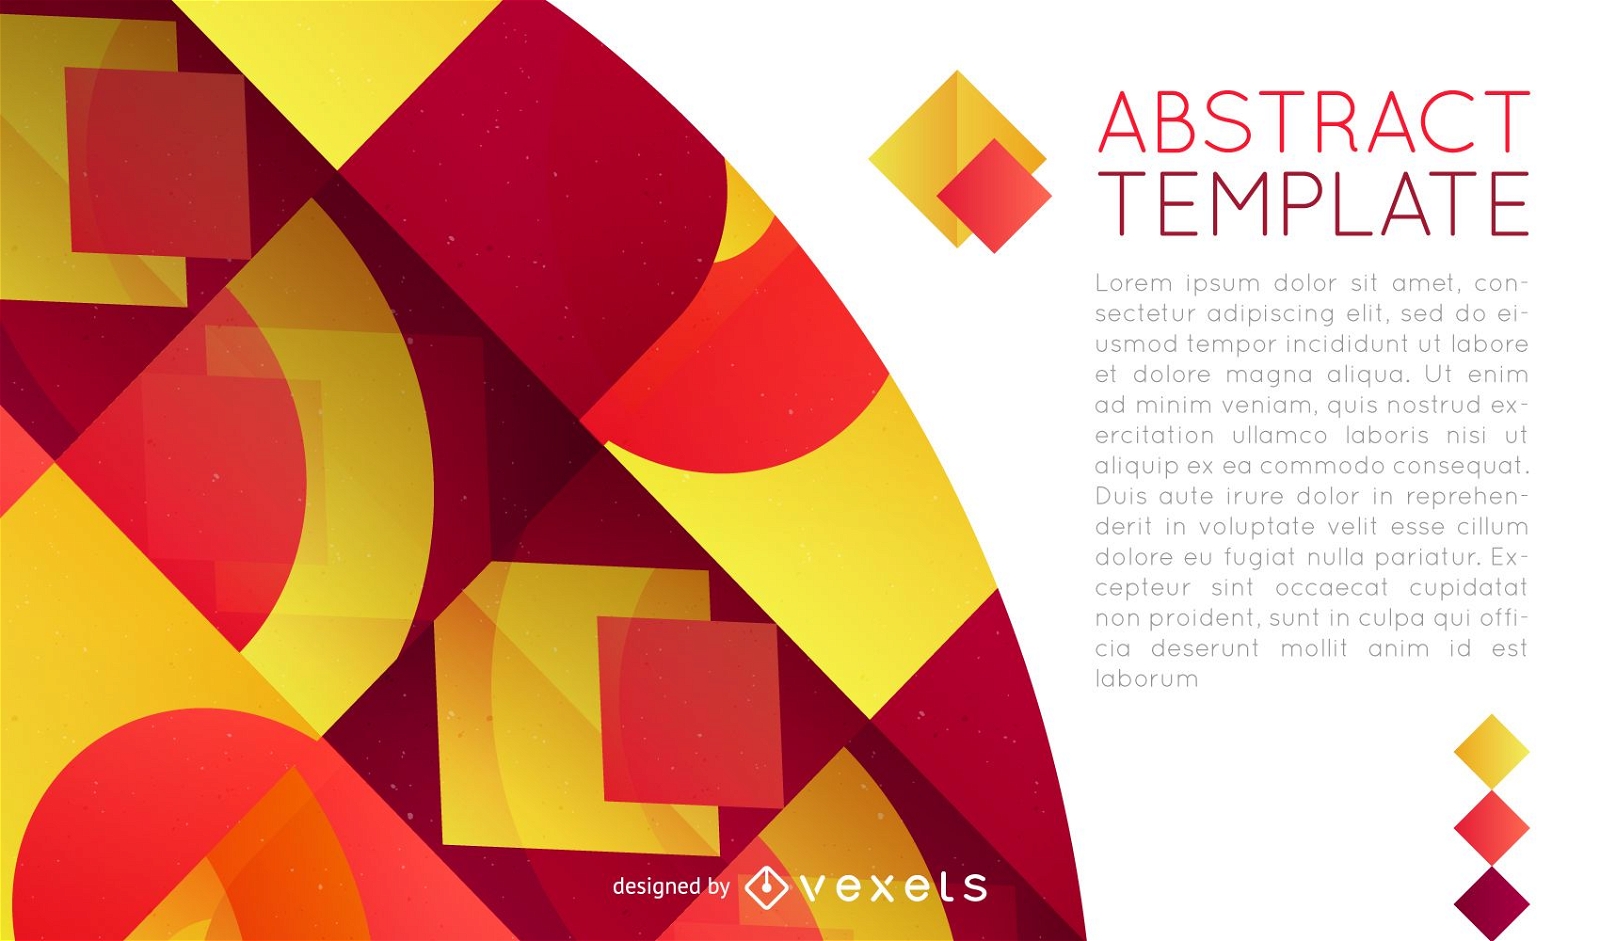 Poster design with red and yellow geometric shapes